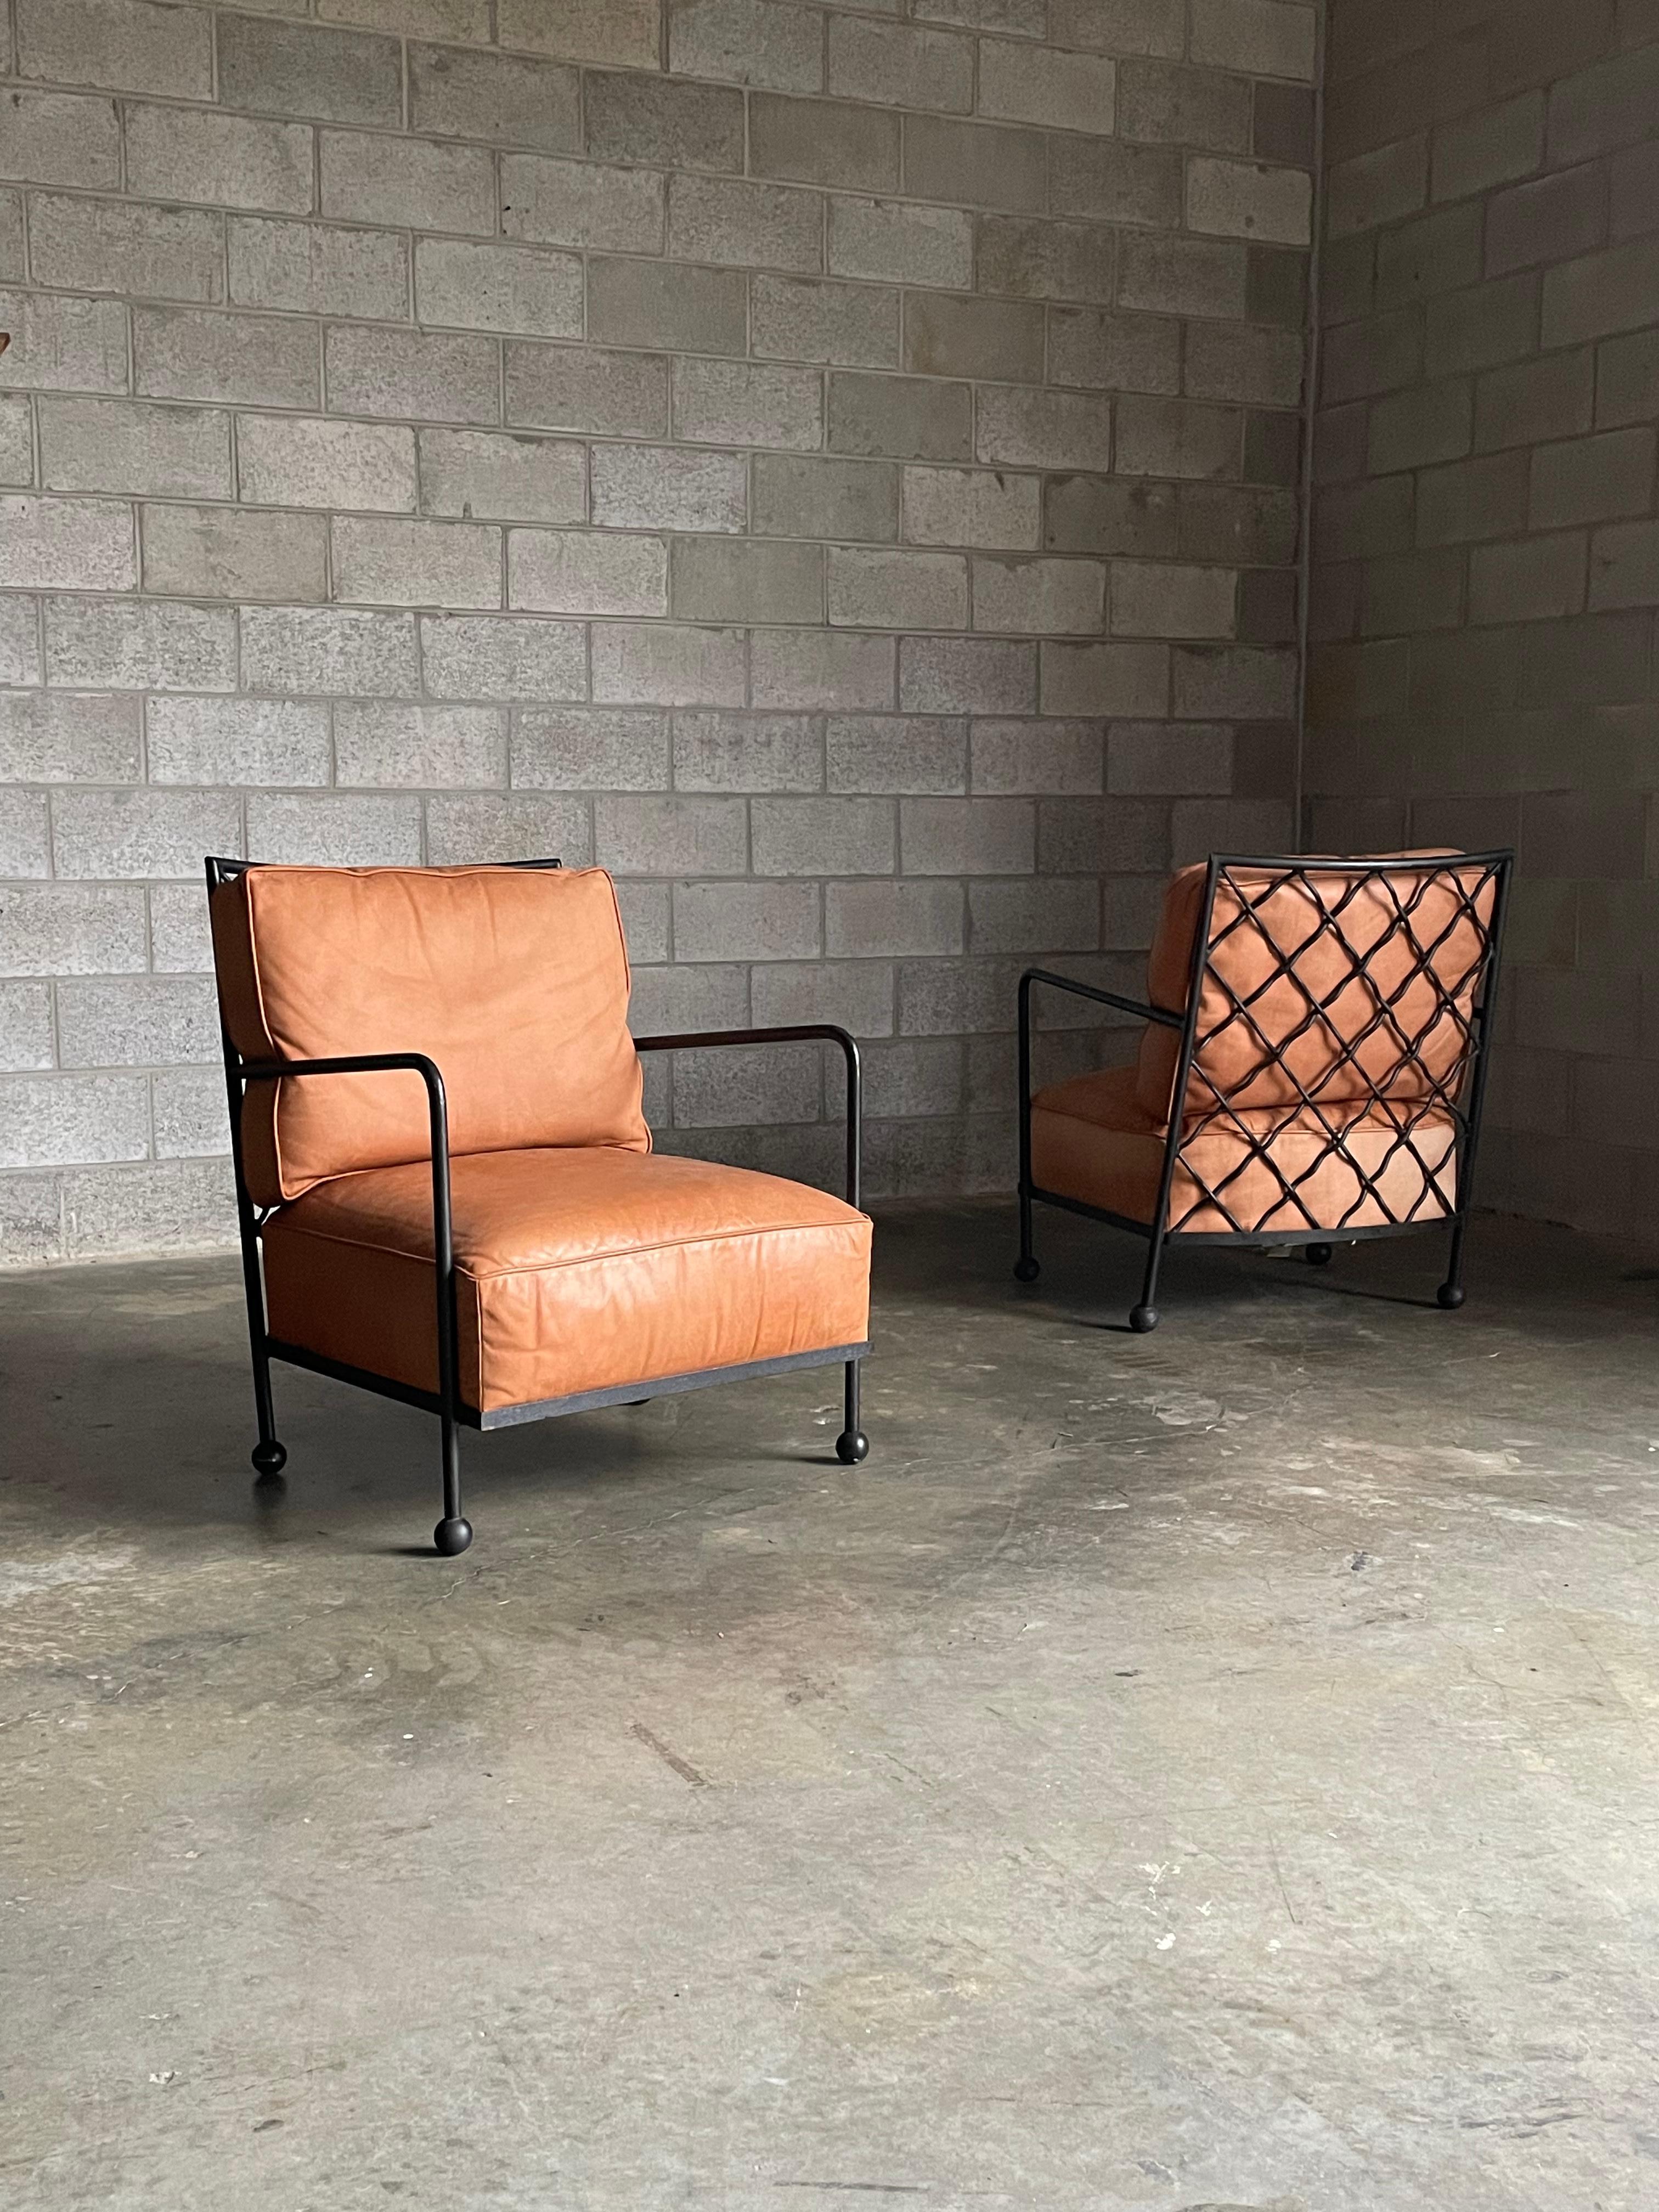 Late 20th Century American Modernist Iron and Leather Lounge Chairs After Jean Royére, by Baker